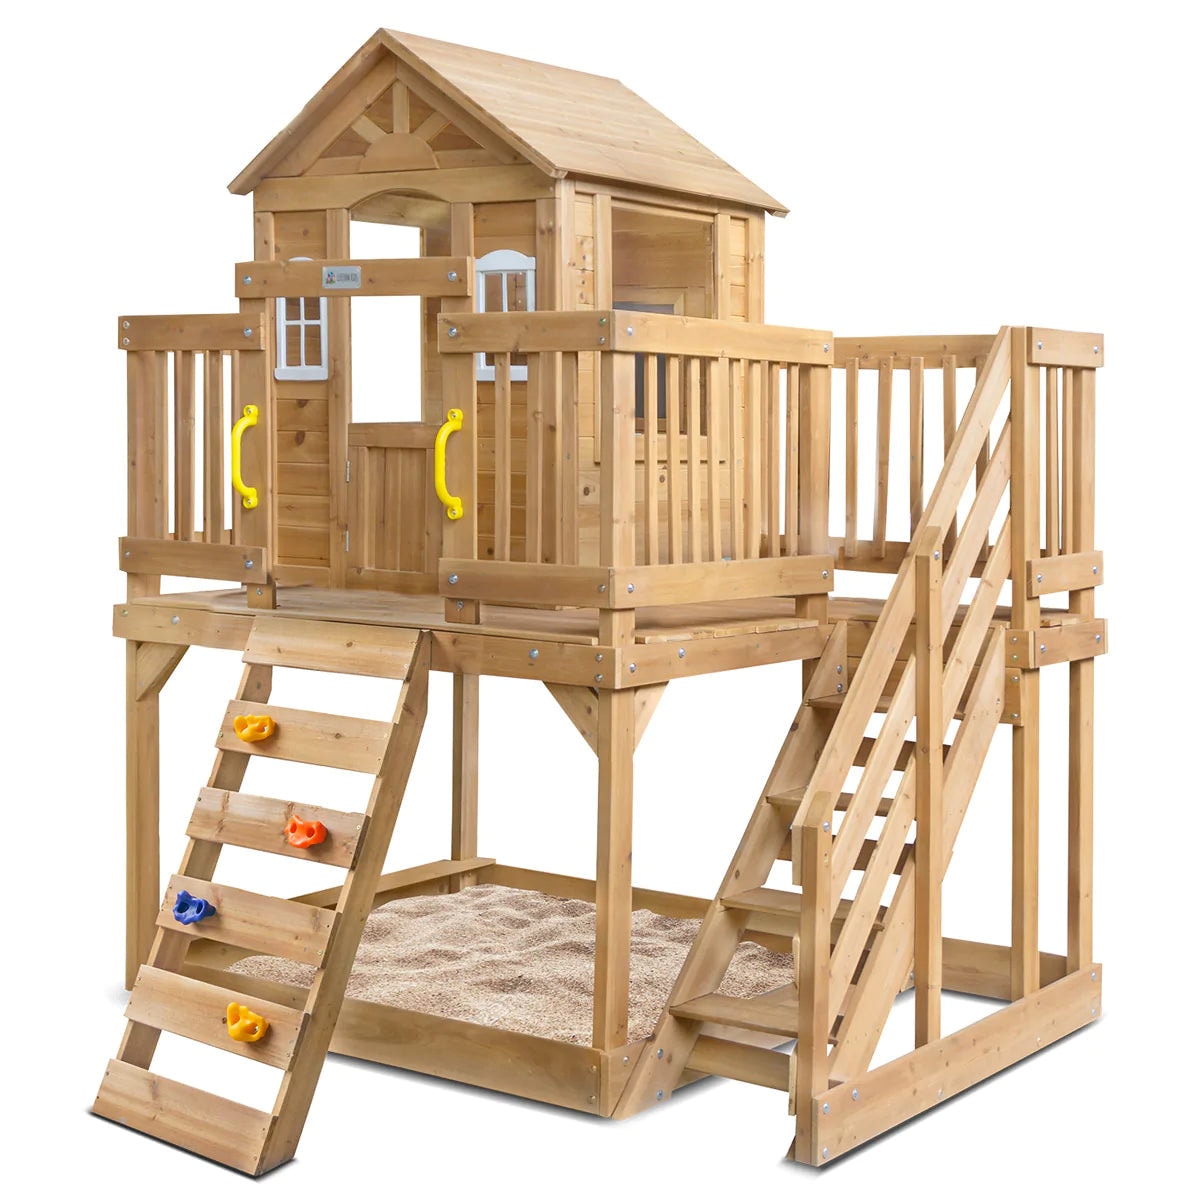 Lifespan Kids Silverton Wooden Cubby House with Sandpit Slide OR Rock Climbing Wall - Lifespan Kids Silverton Wooden Cubby House with Rock